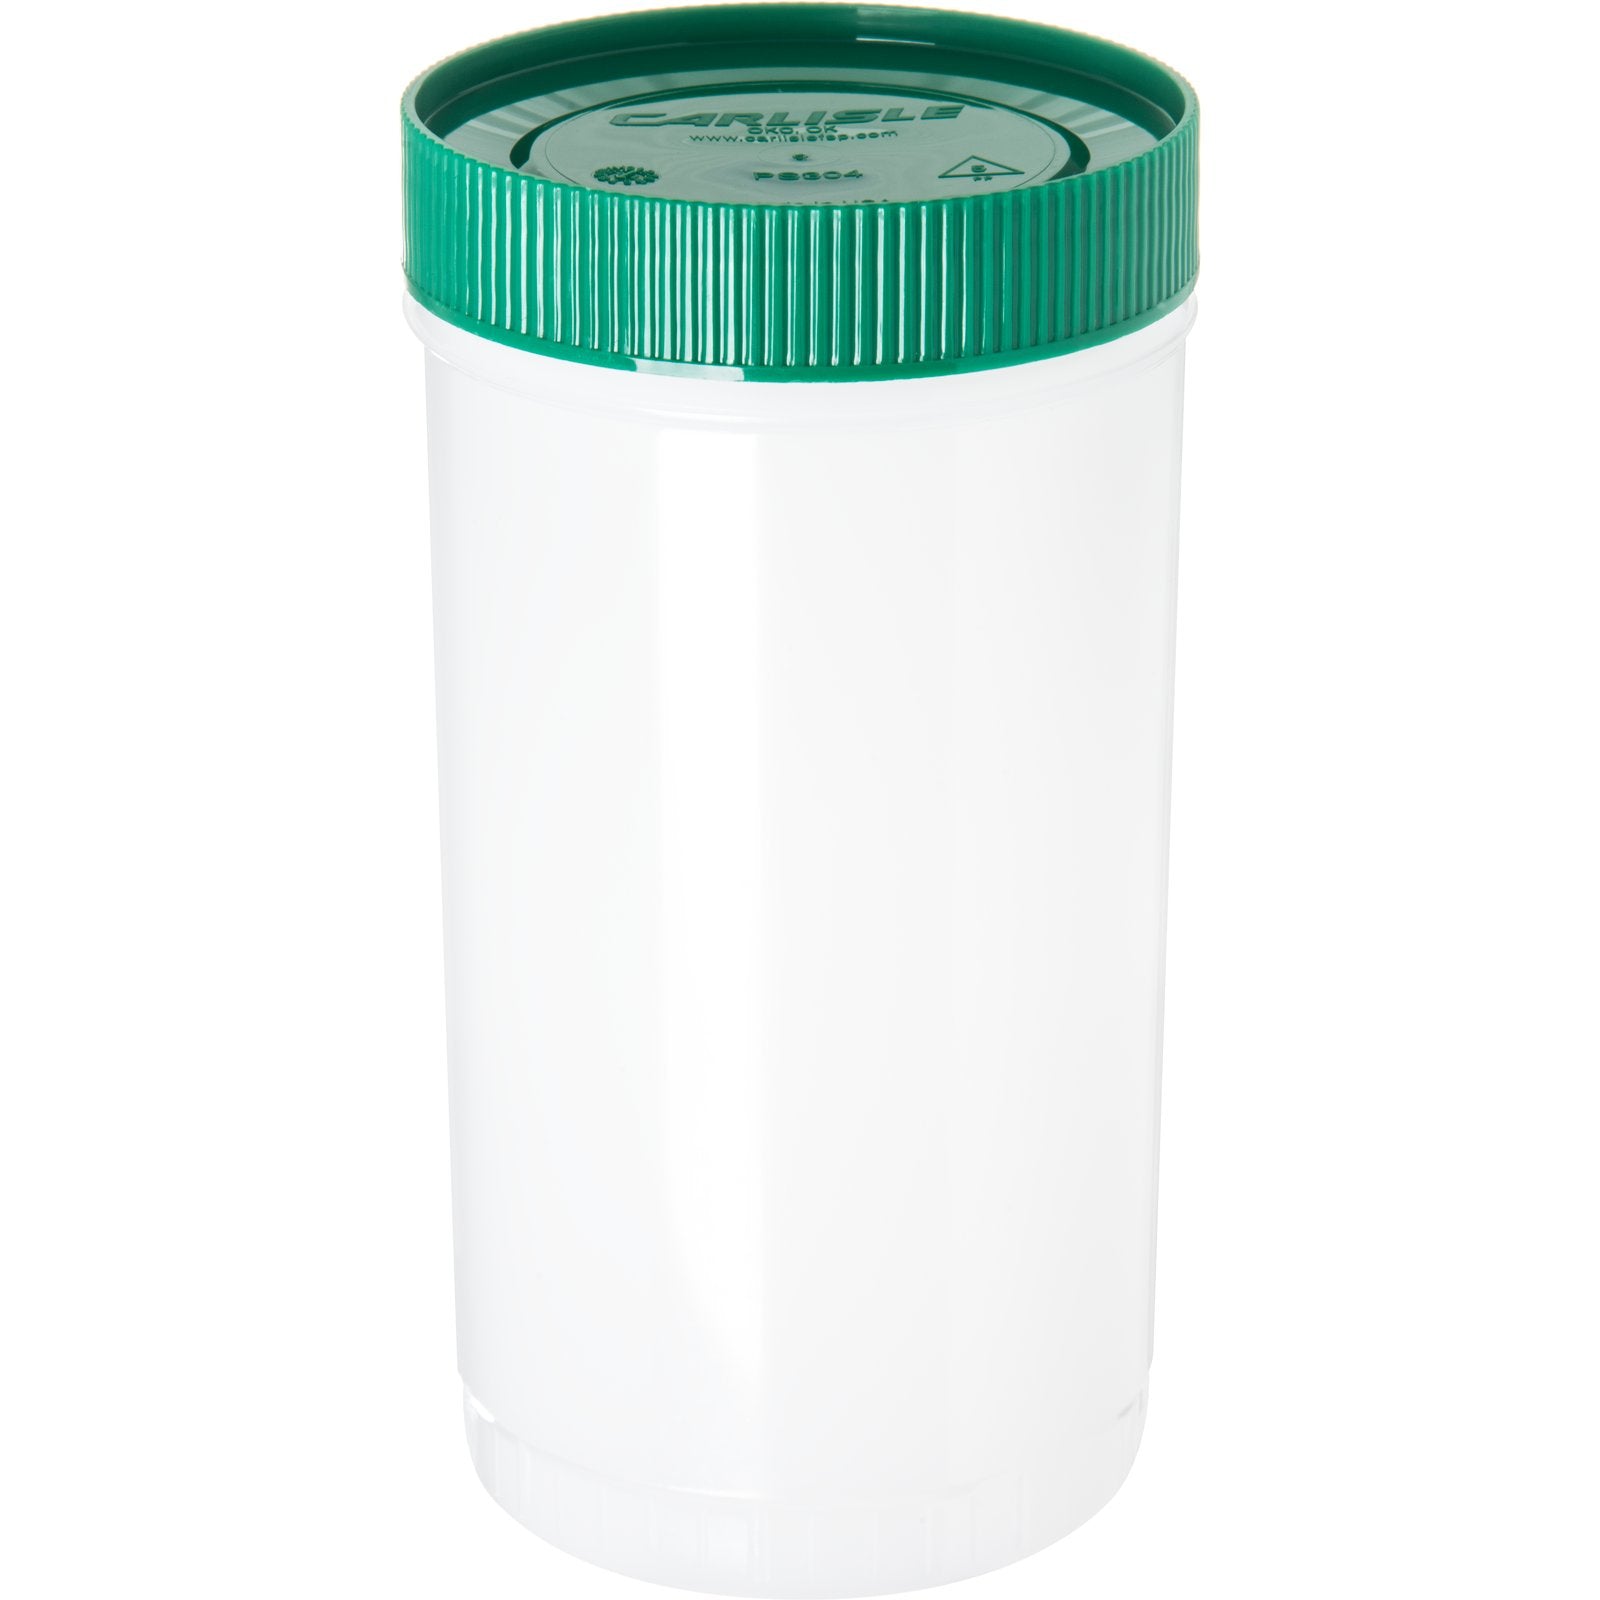 STOR N POR COMPLETE UNIT 1 QT - Mabrook Hotel Supplies